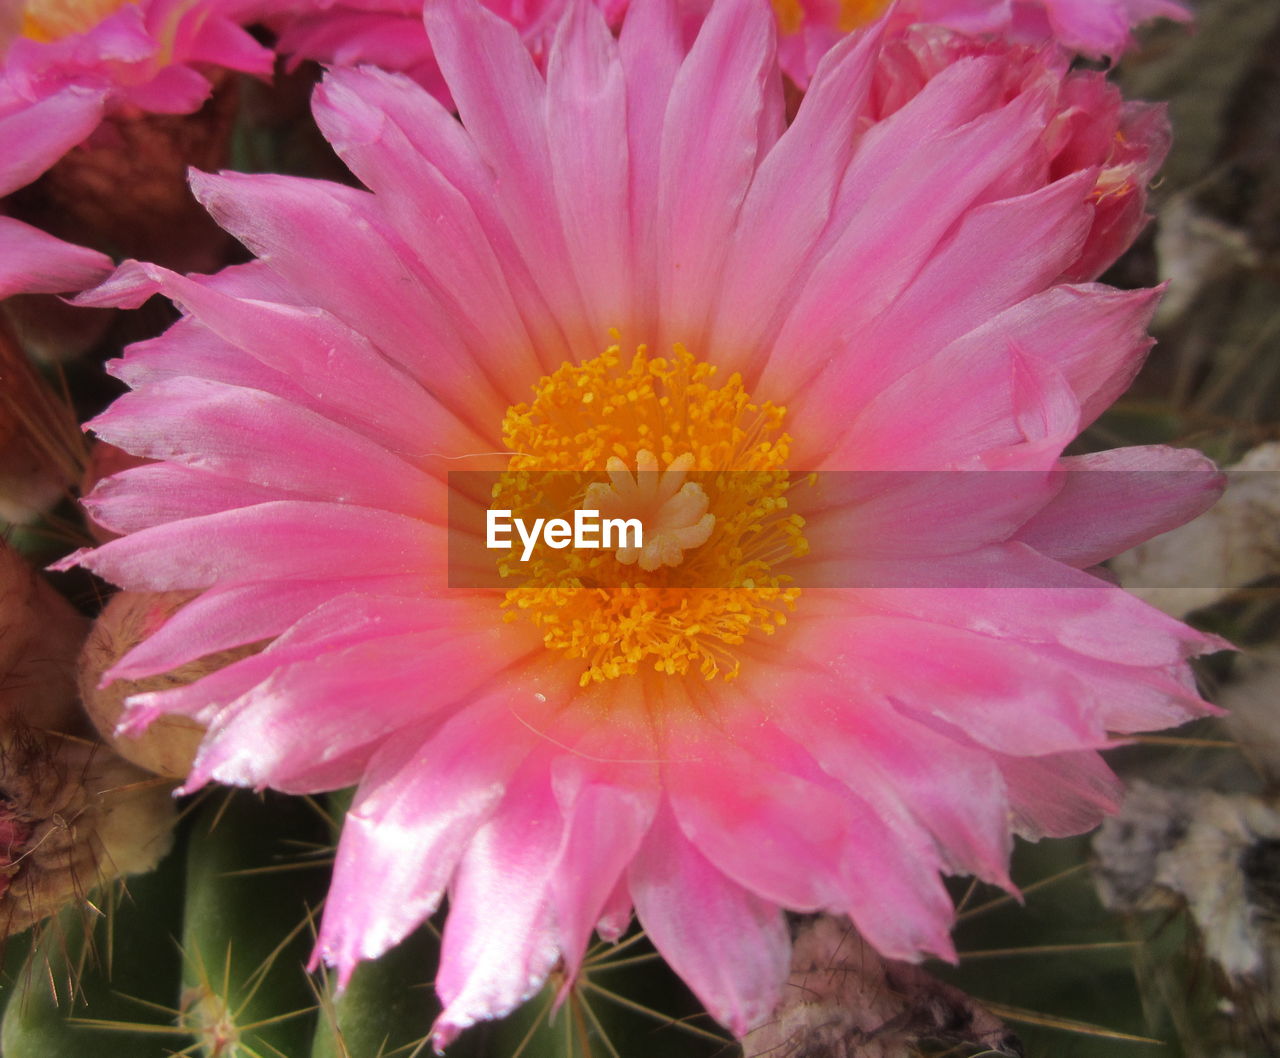 flower, flowering plant, plant, beauty in nature, freshness, petal, pink, flower head, close-up, cactus, fragility, growth, inflorescence, nature, pollen, no people, outdoors, focus on foreground, day, springtime, blossom